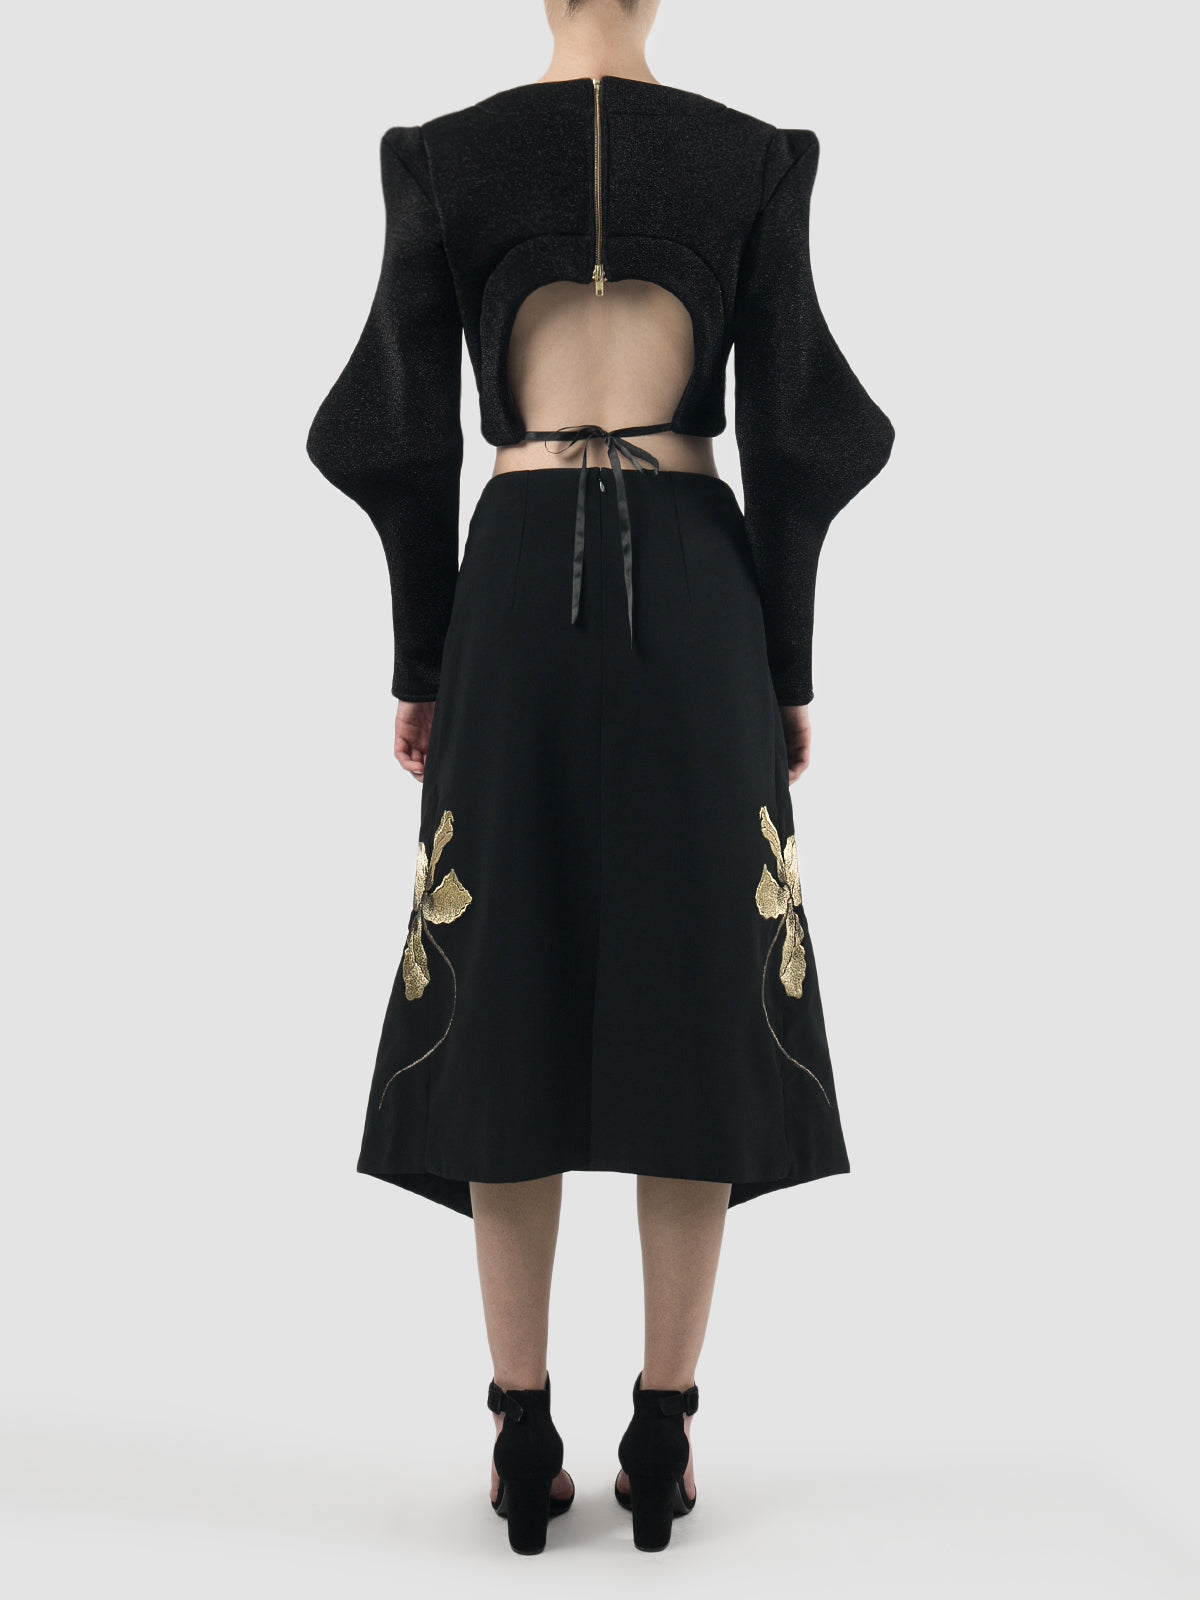 Black neoprene cropped top with abstract long sleeves